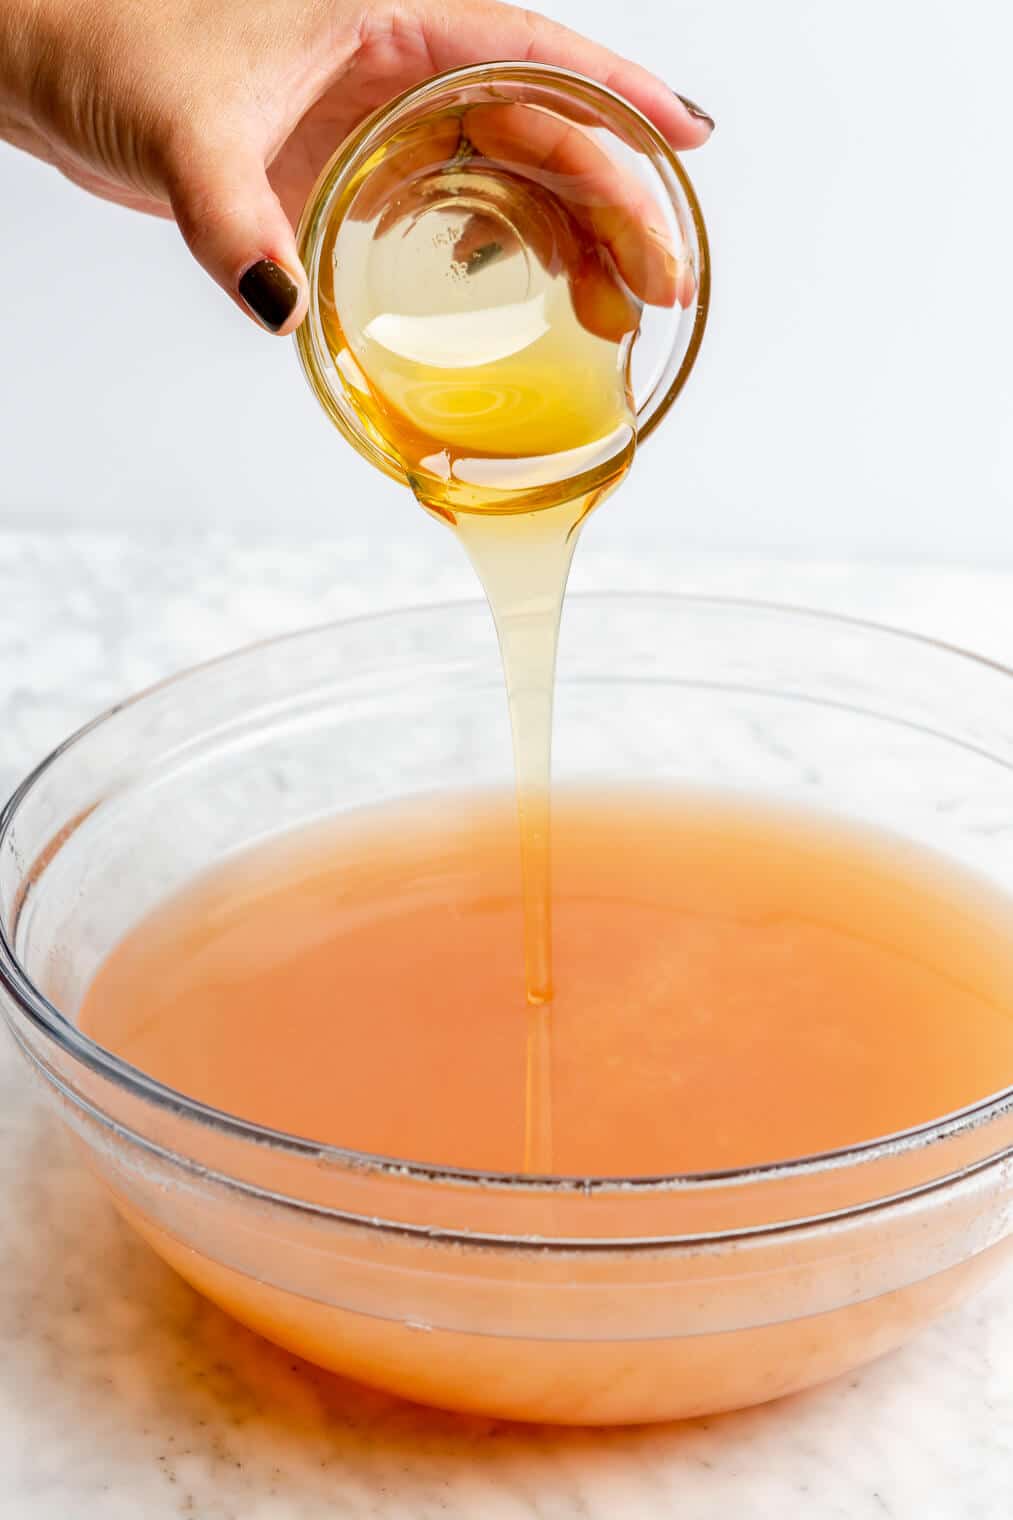 Hand pouring honey into spiced cider liquid in a large glass bowl.